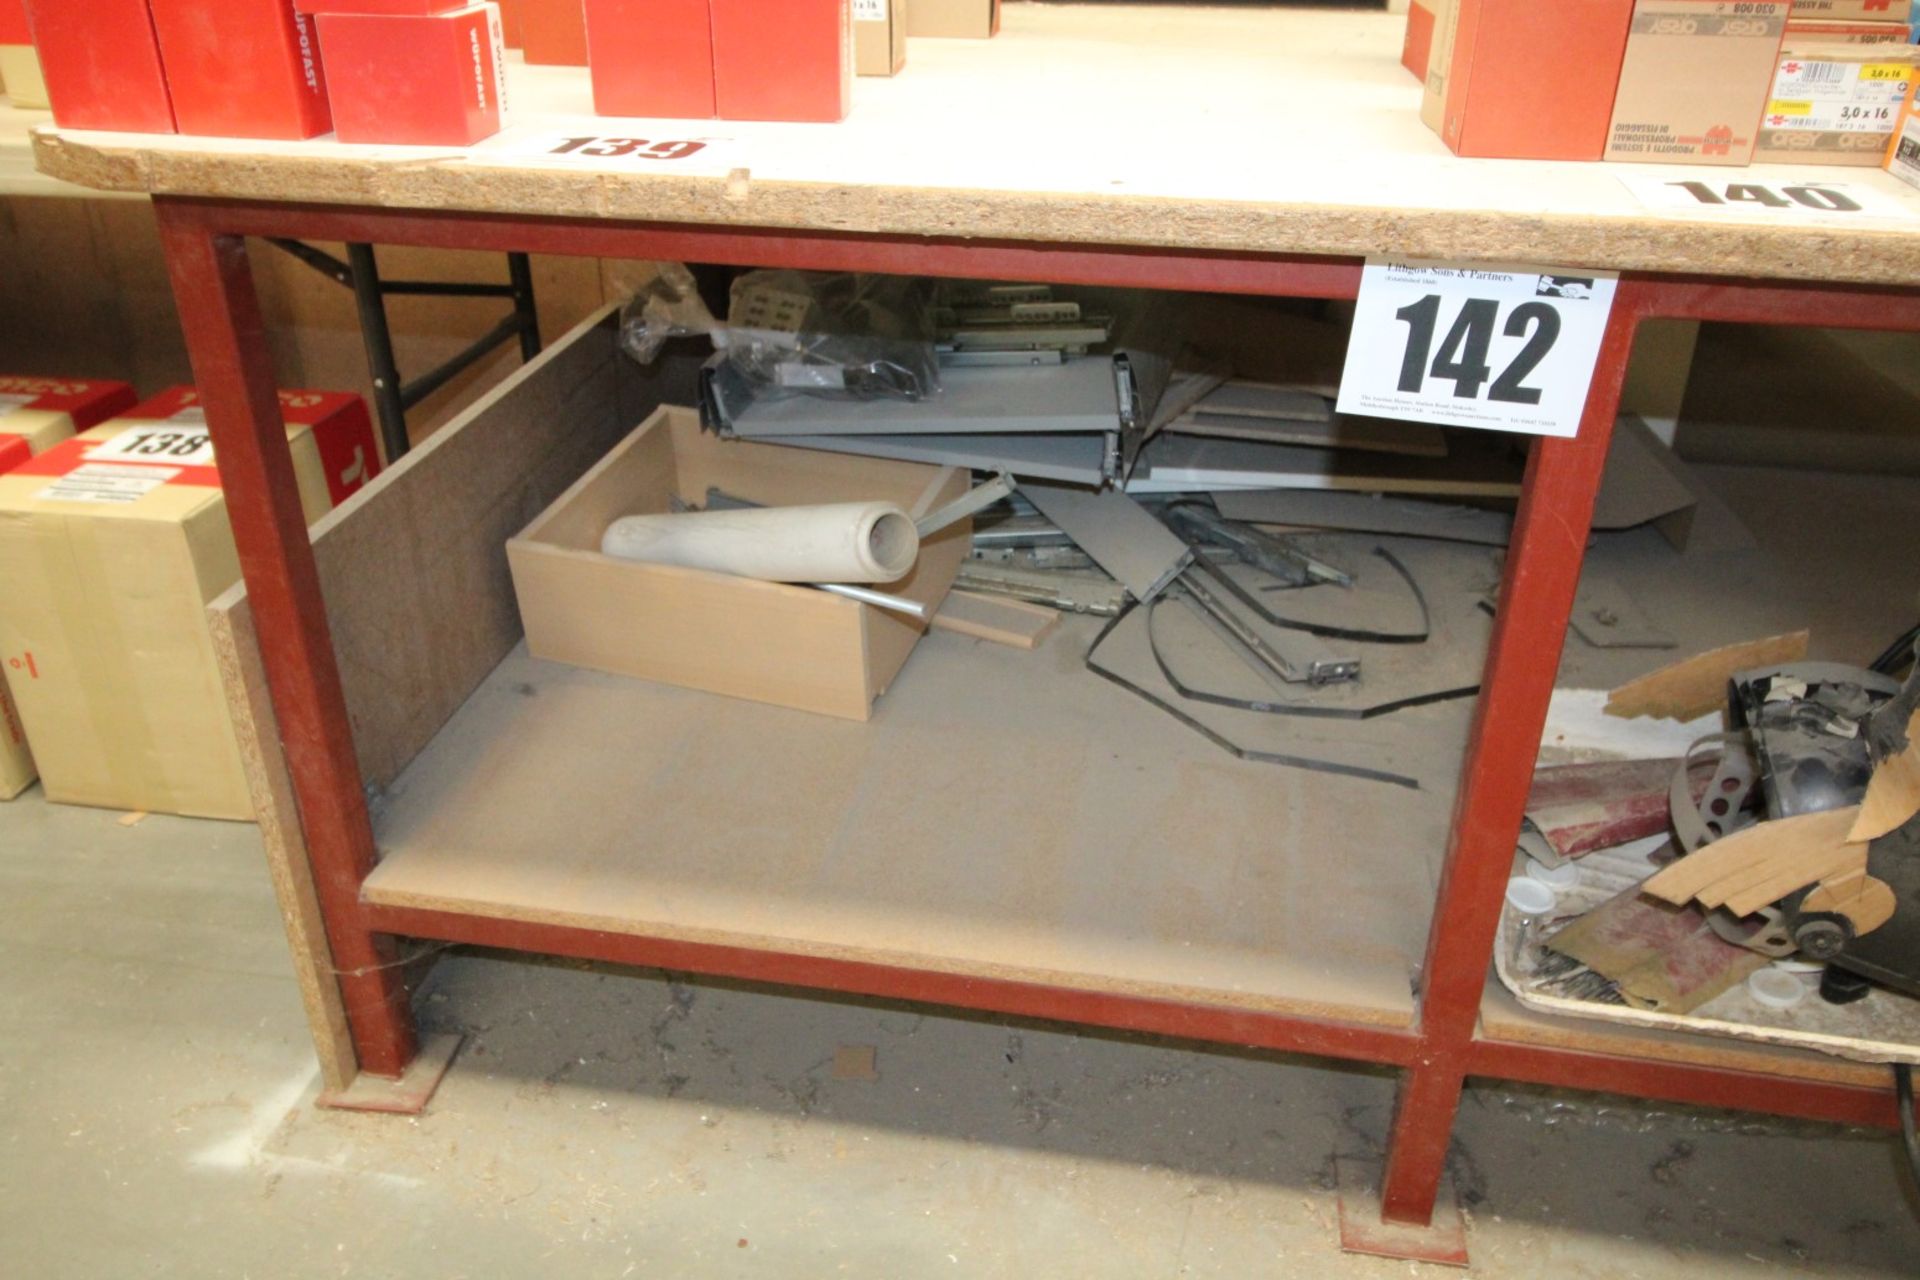 METAL FRAMED, WOODEN TOPPED WORK BENCH MEASURING APPROX. 57INCH x 7FT